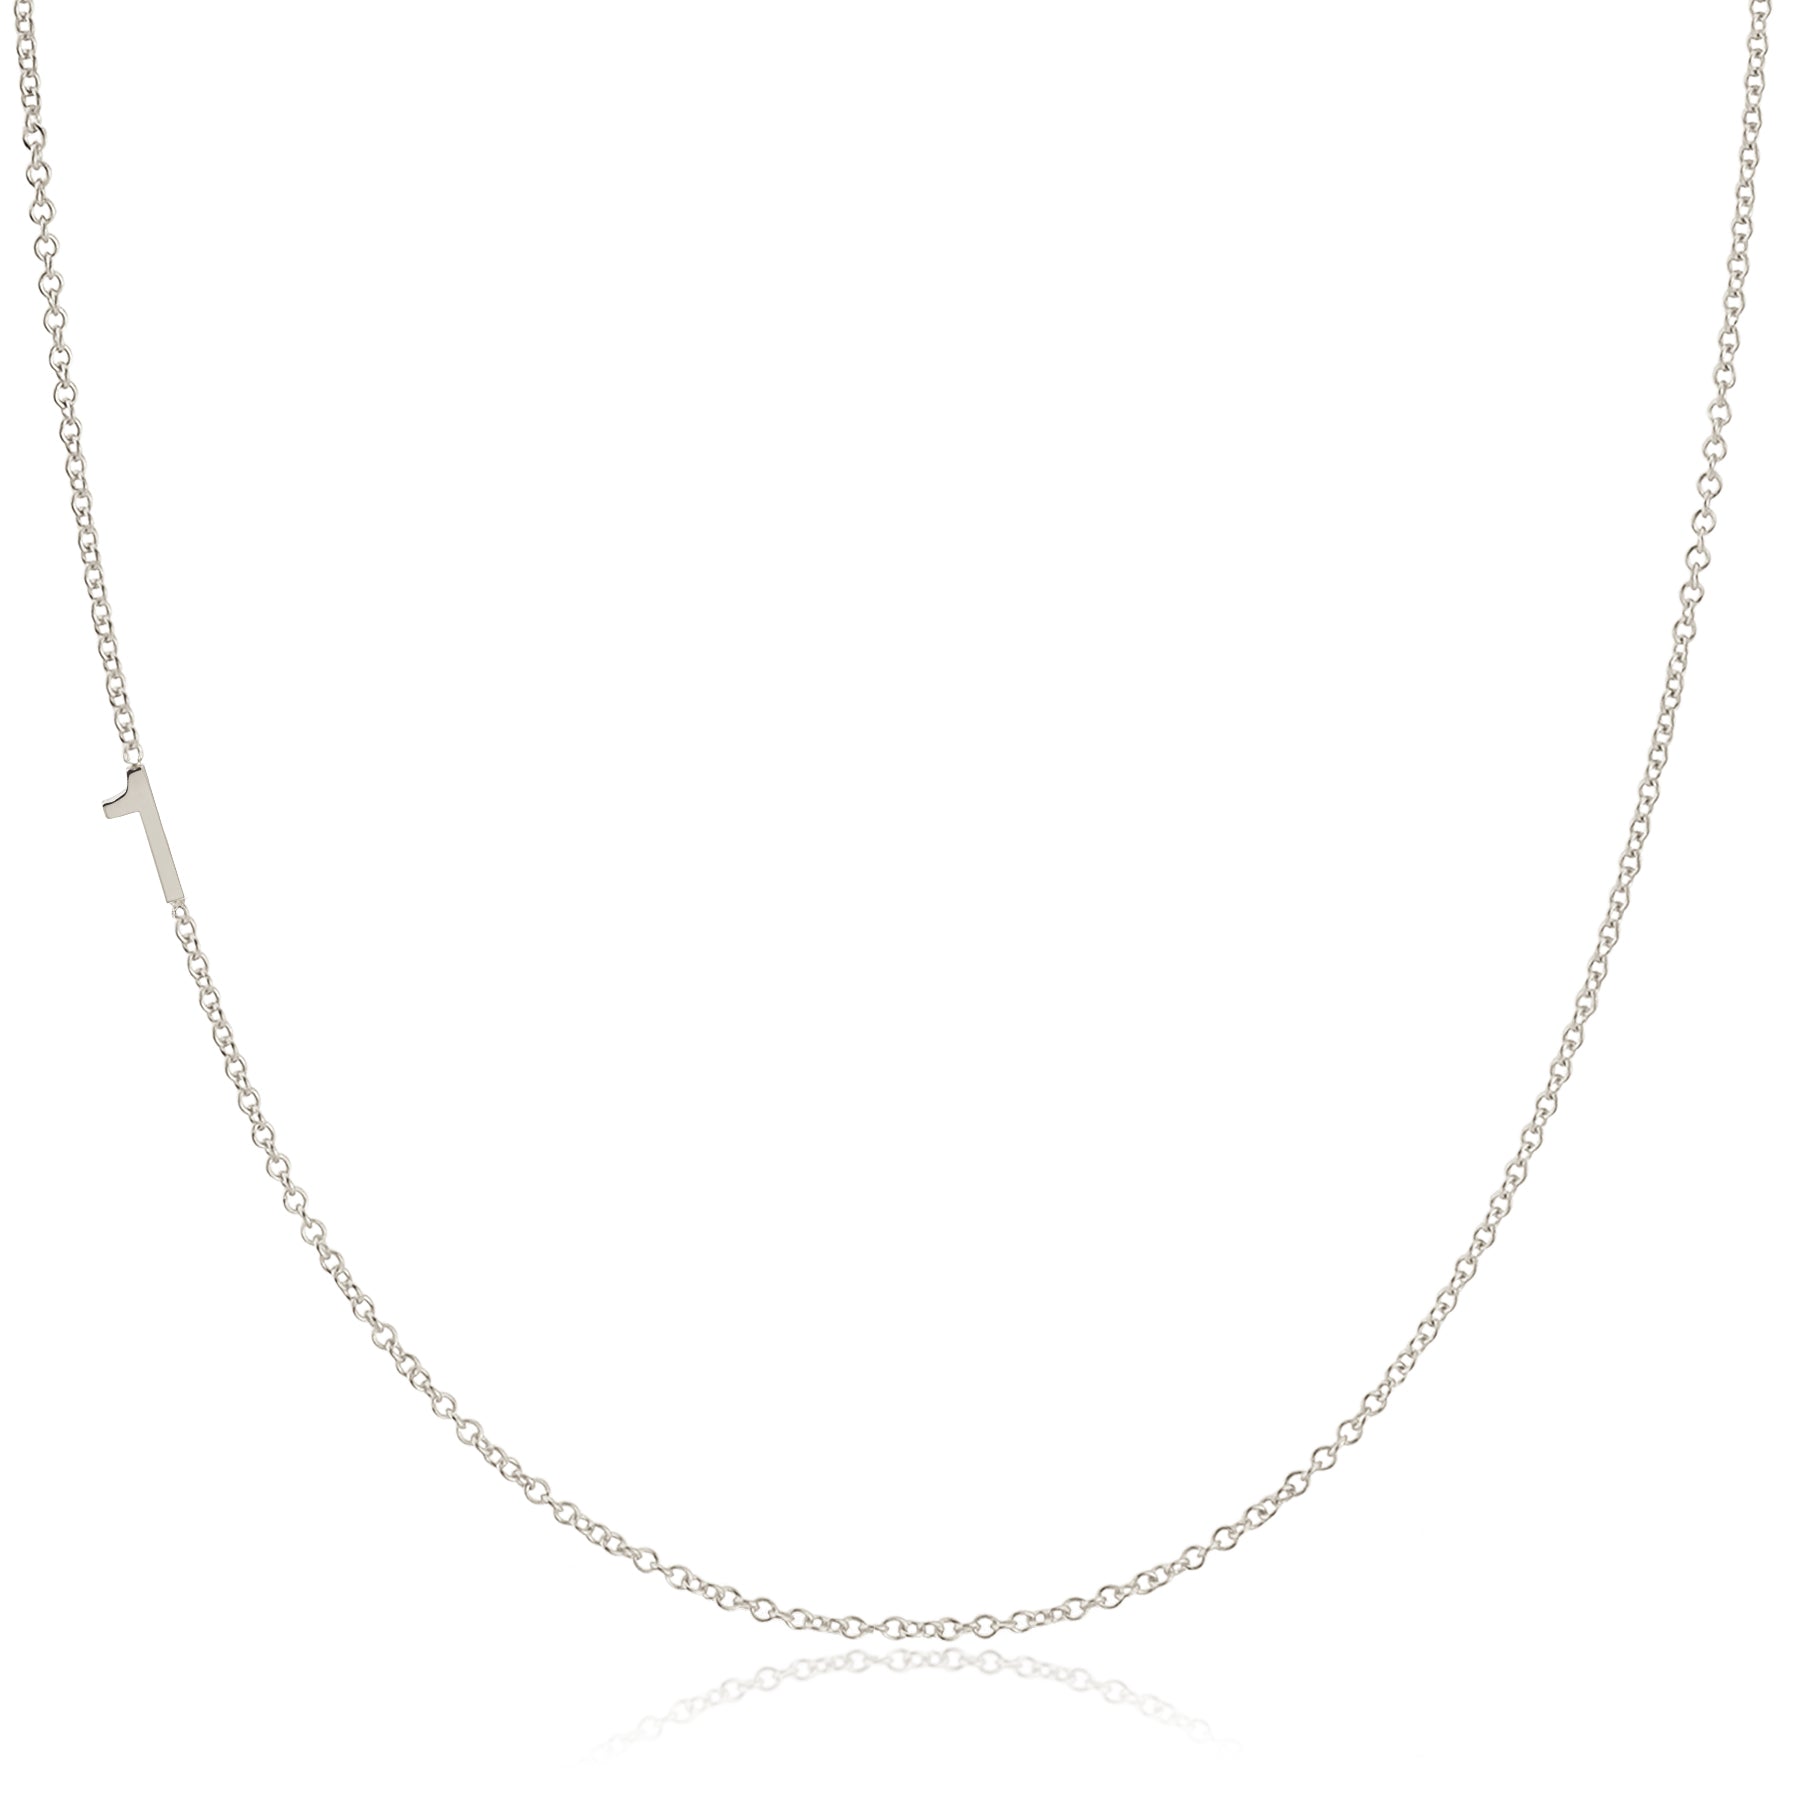 14K GOLD ASYMMETRICAL NUMBER NECKLACE - 1